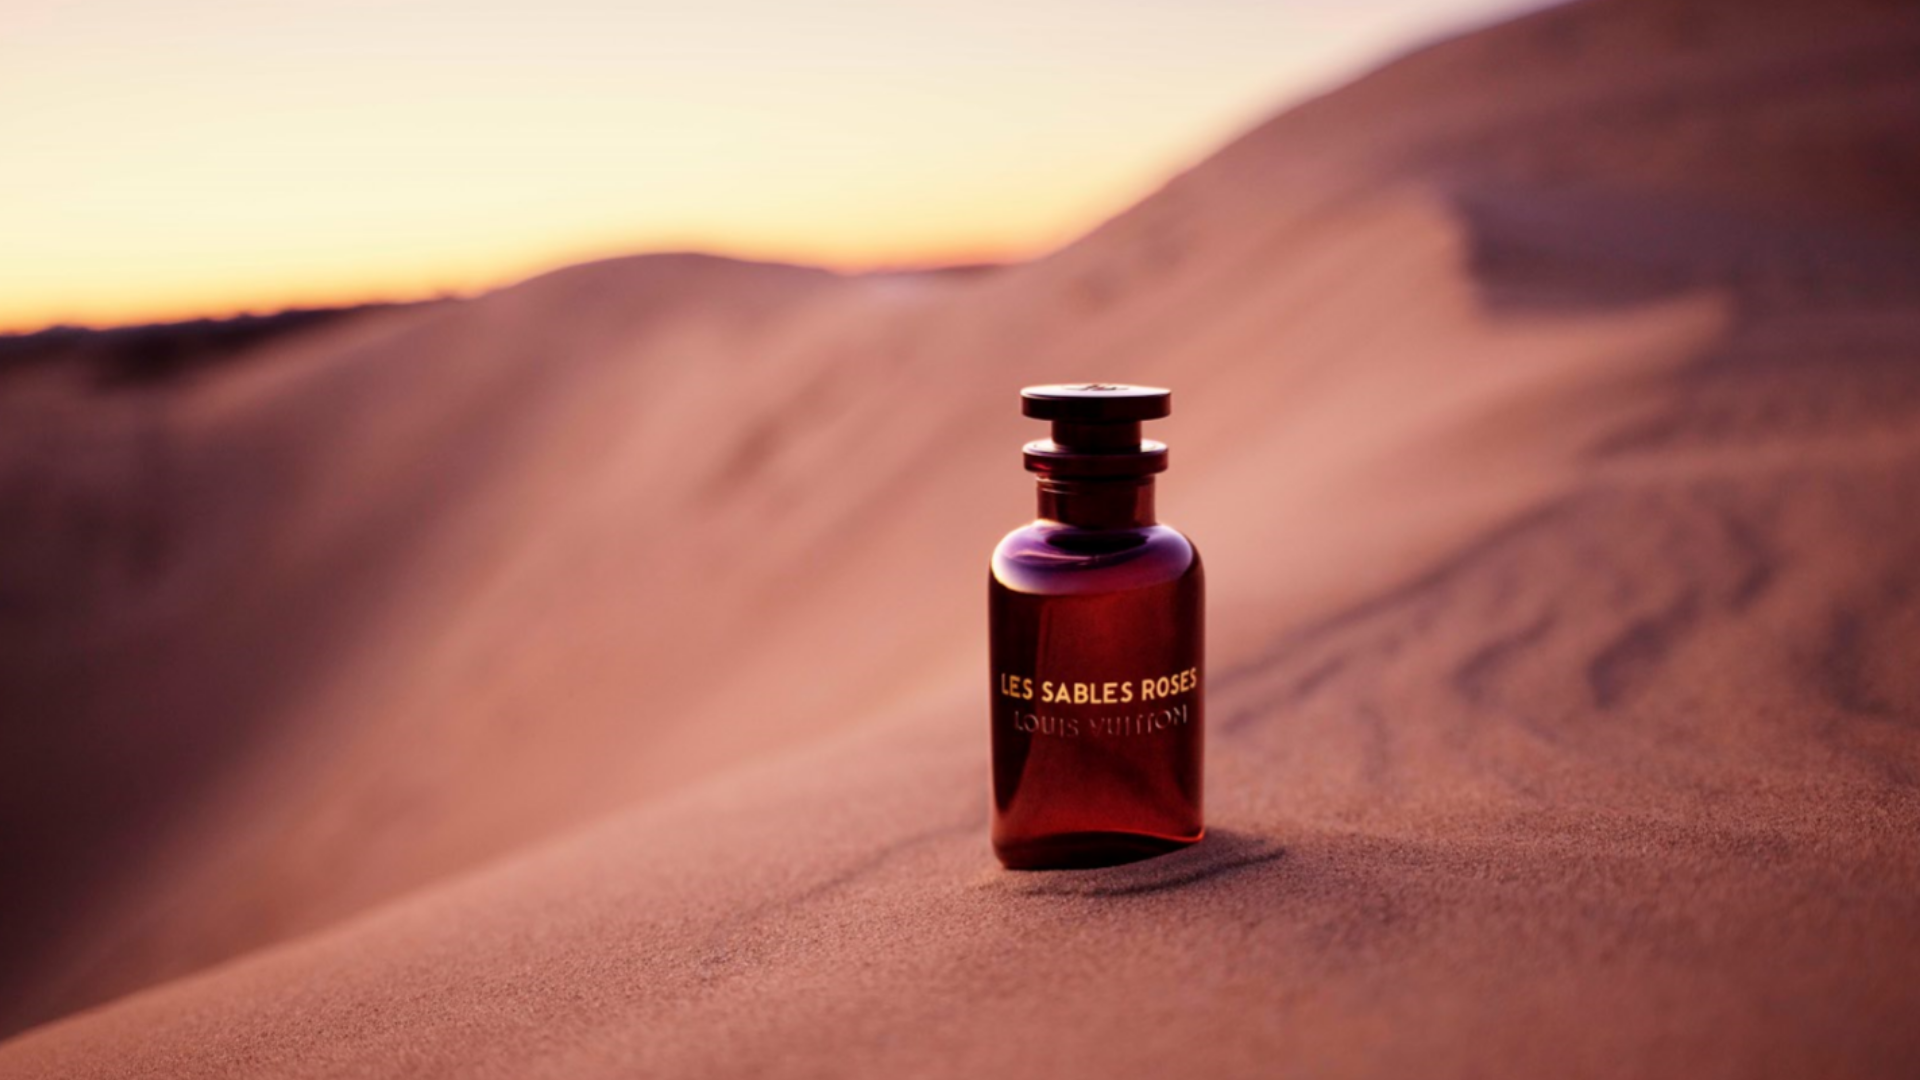 Louis Vuitton Highlights the Scents of the Middle East With Fleur